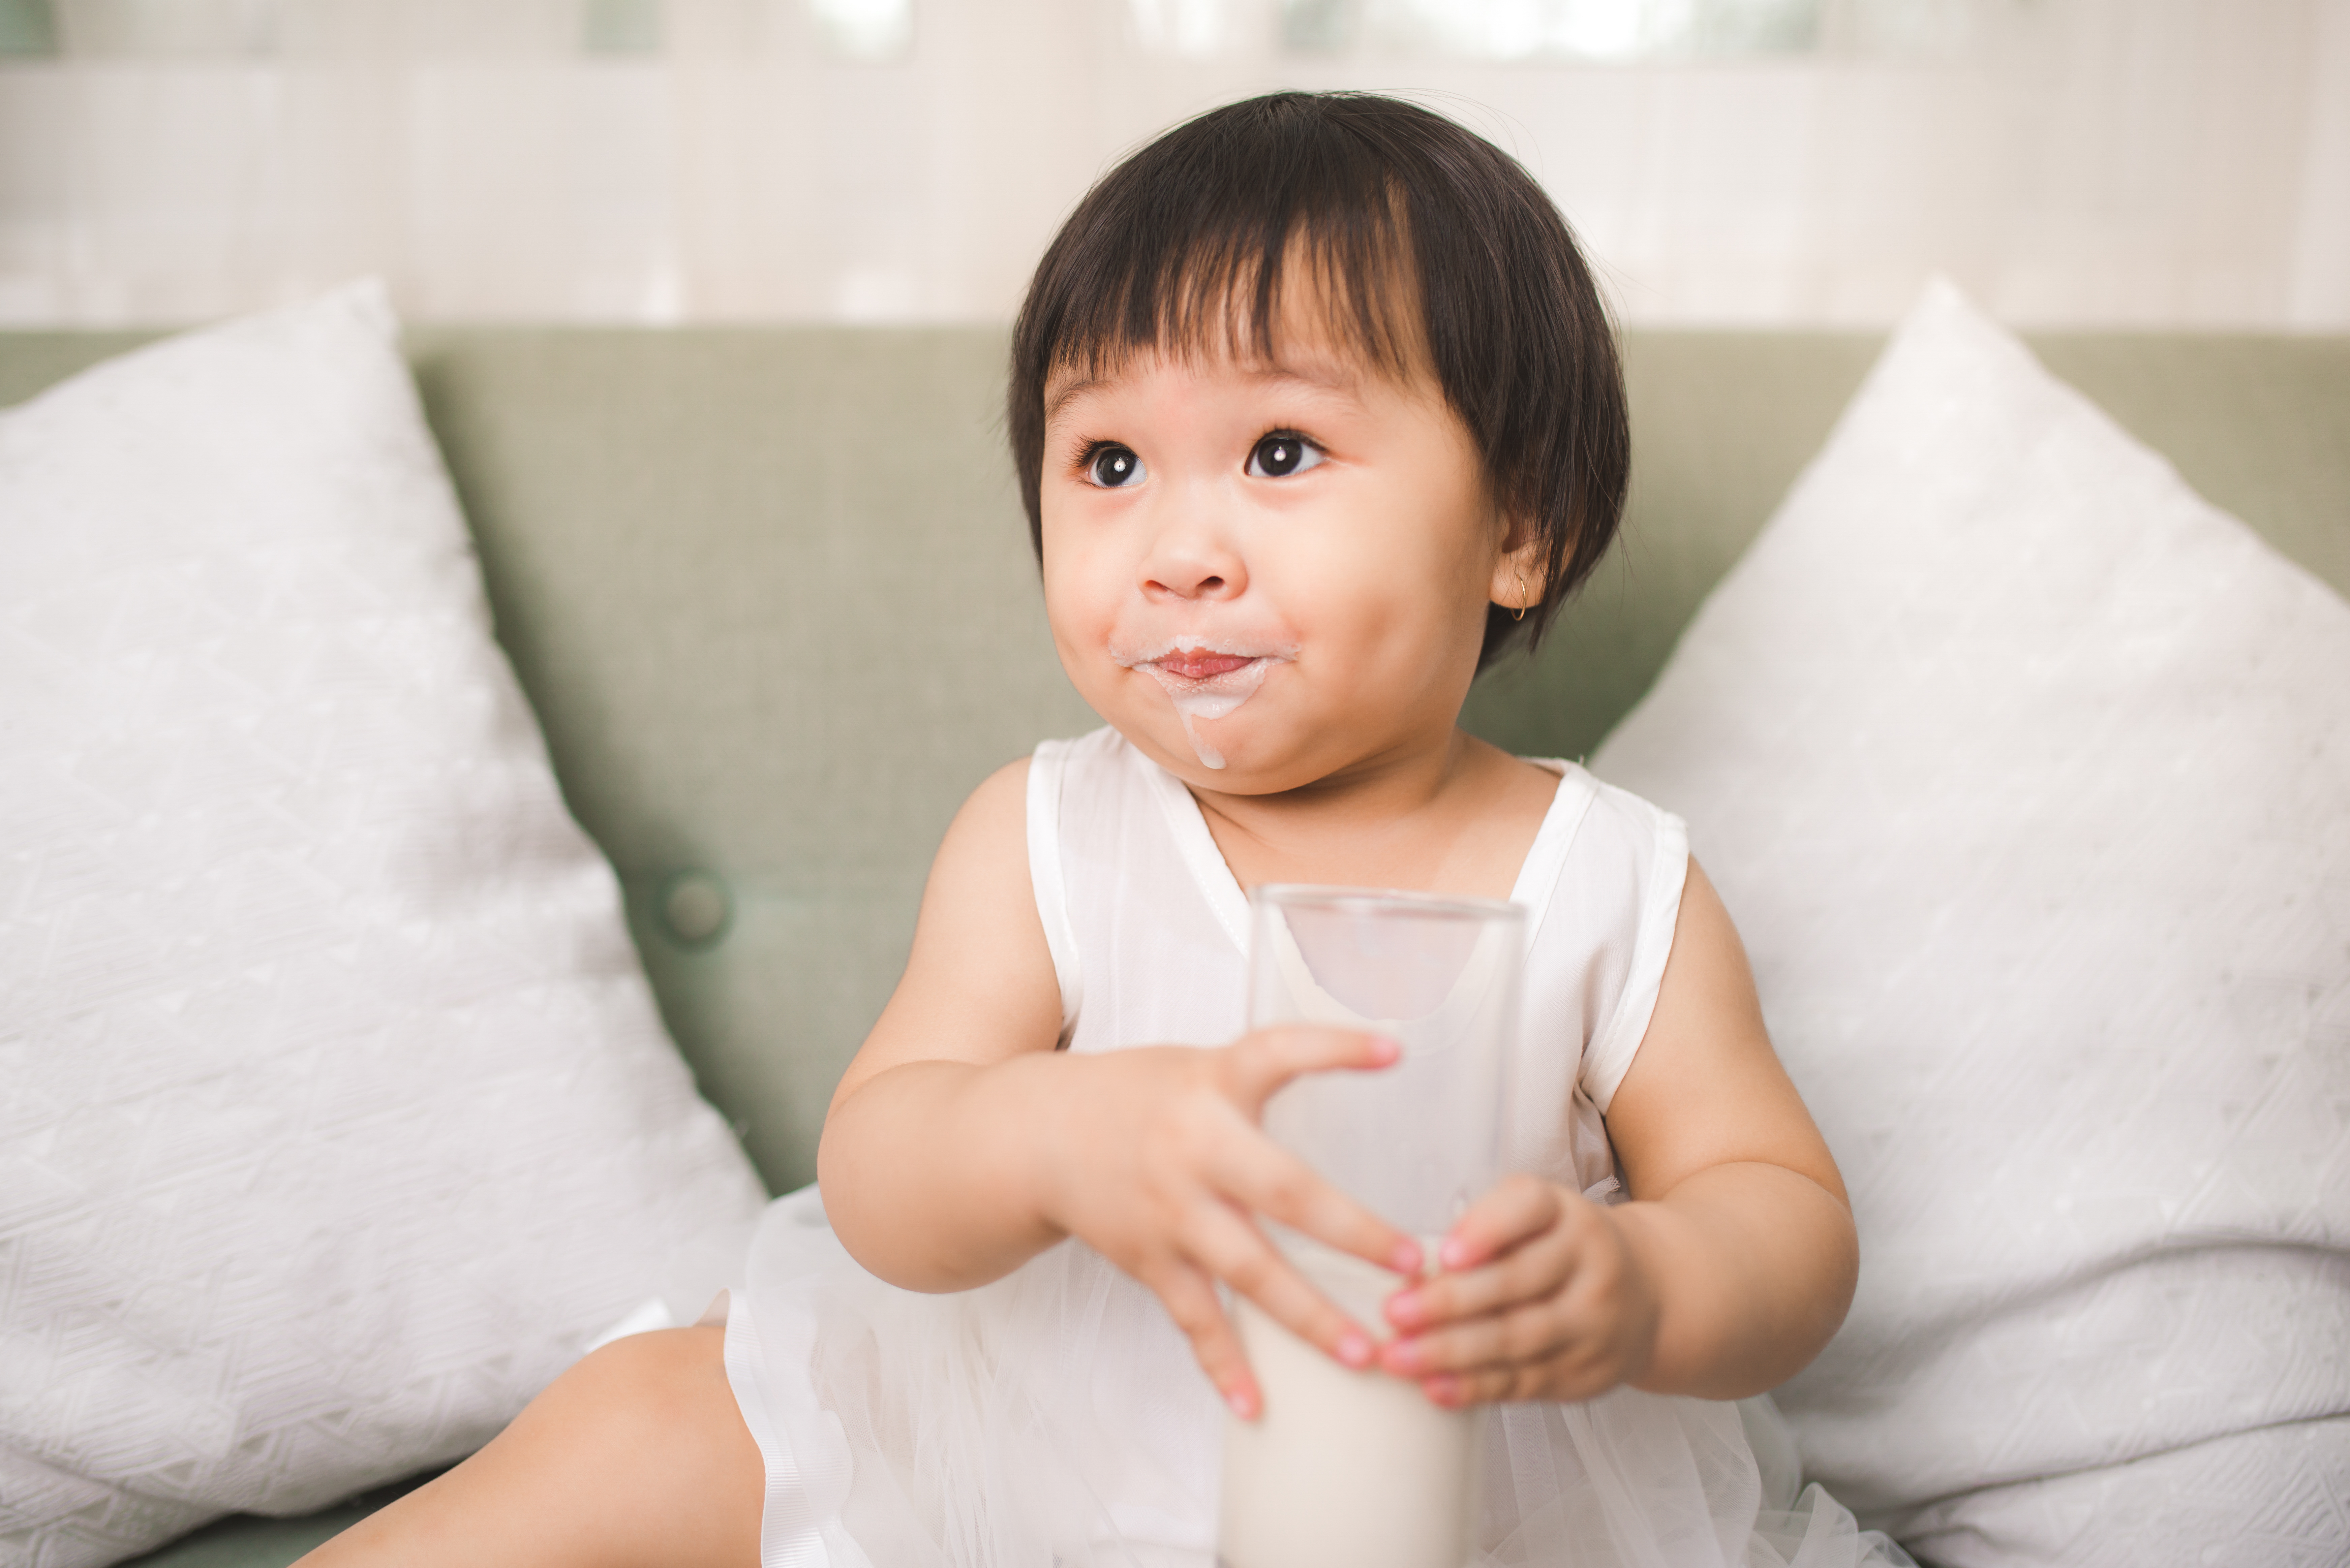 Baby reflux: How to prevent and manage in babies when feeding